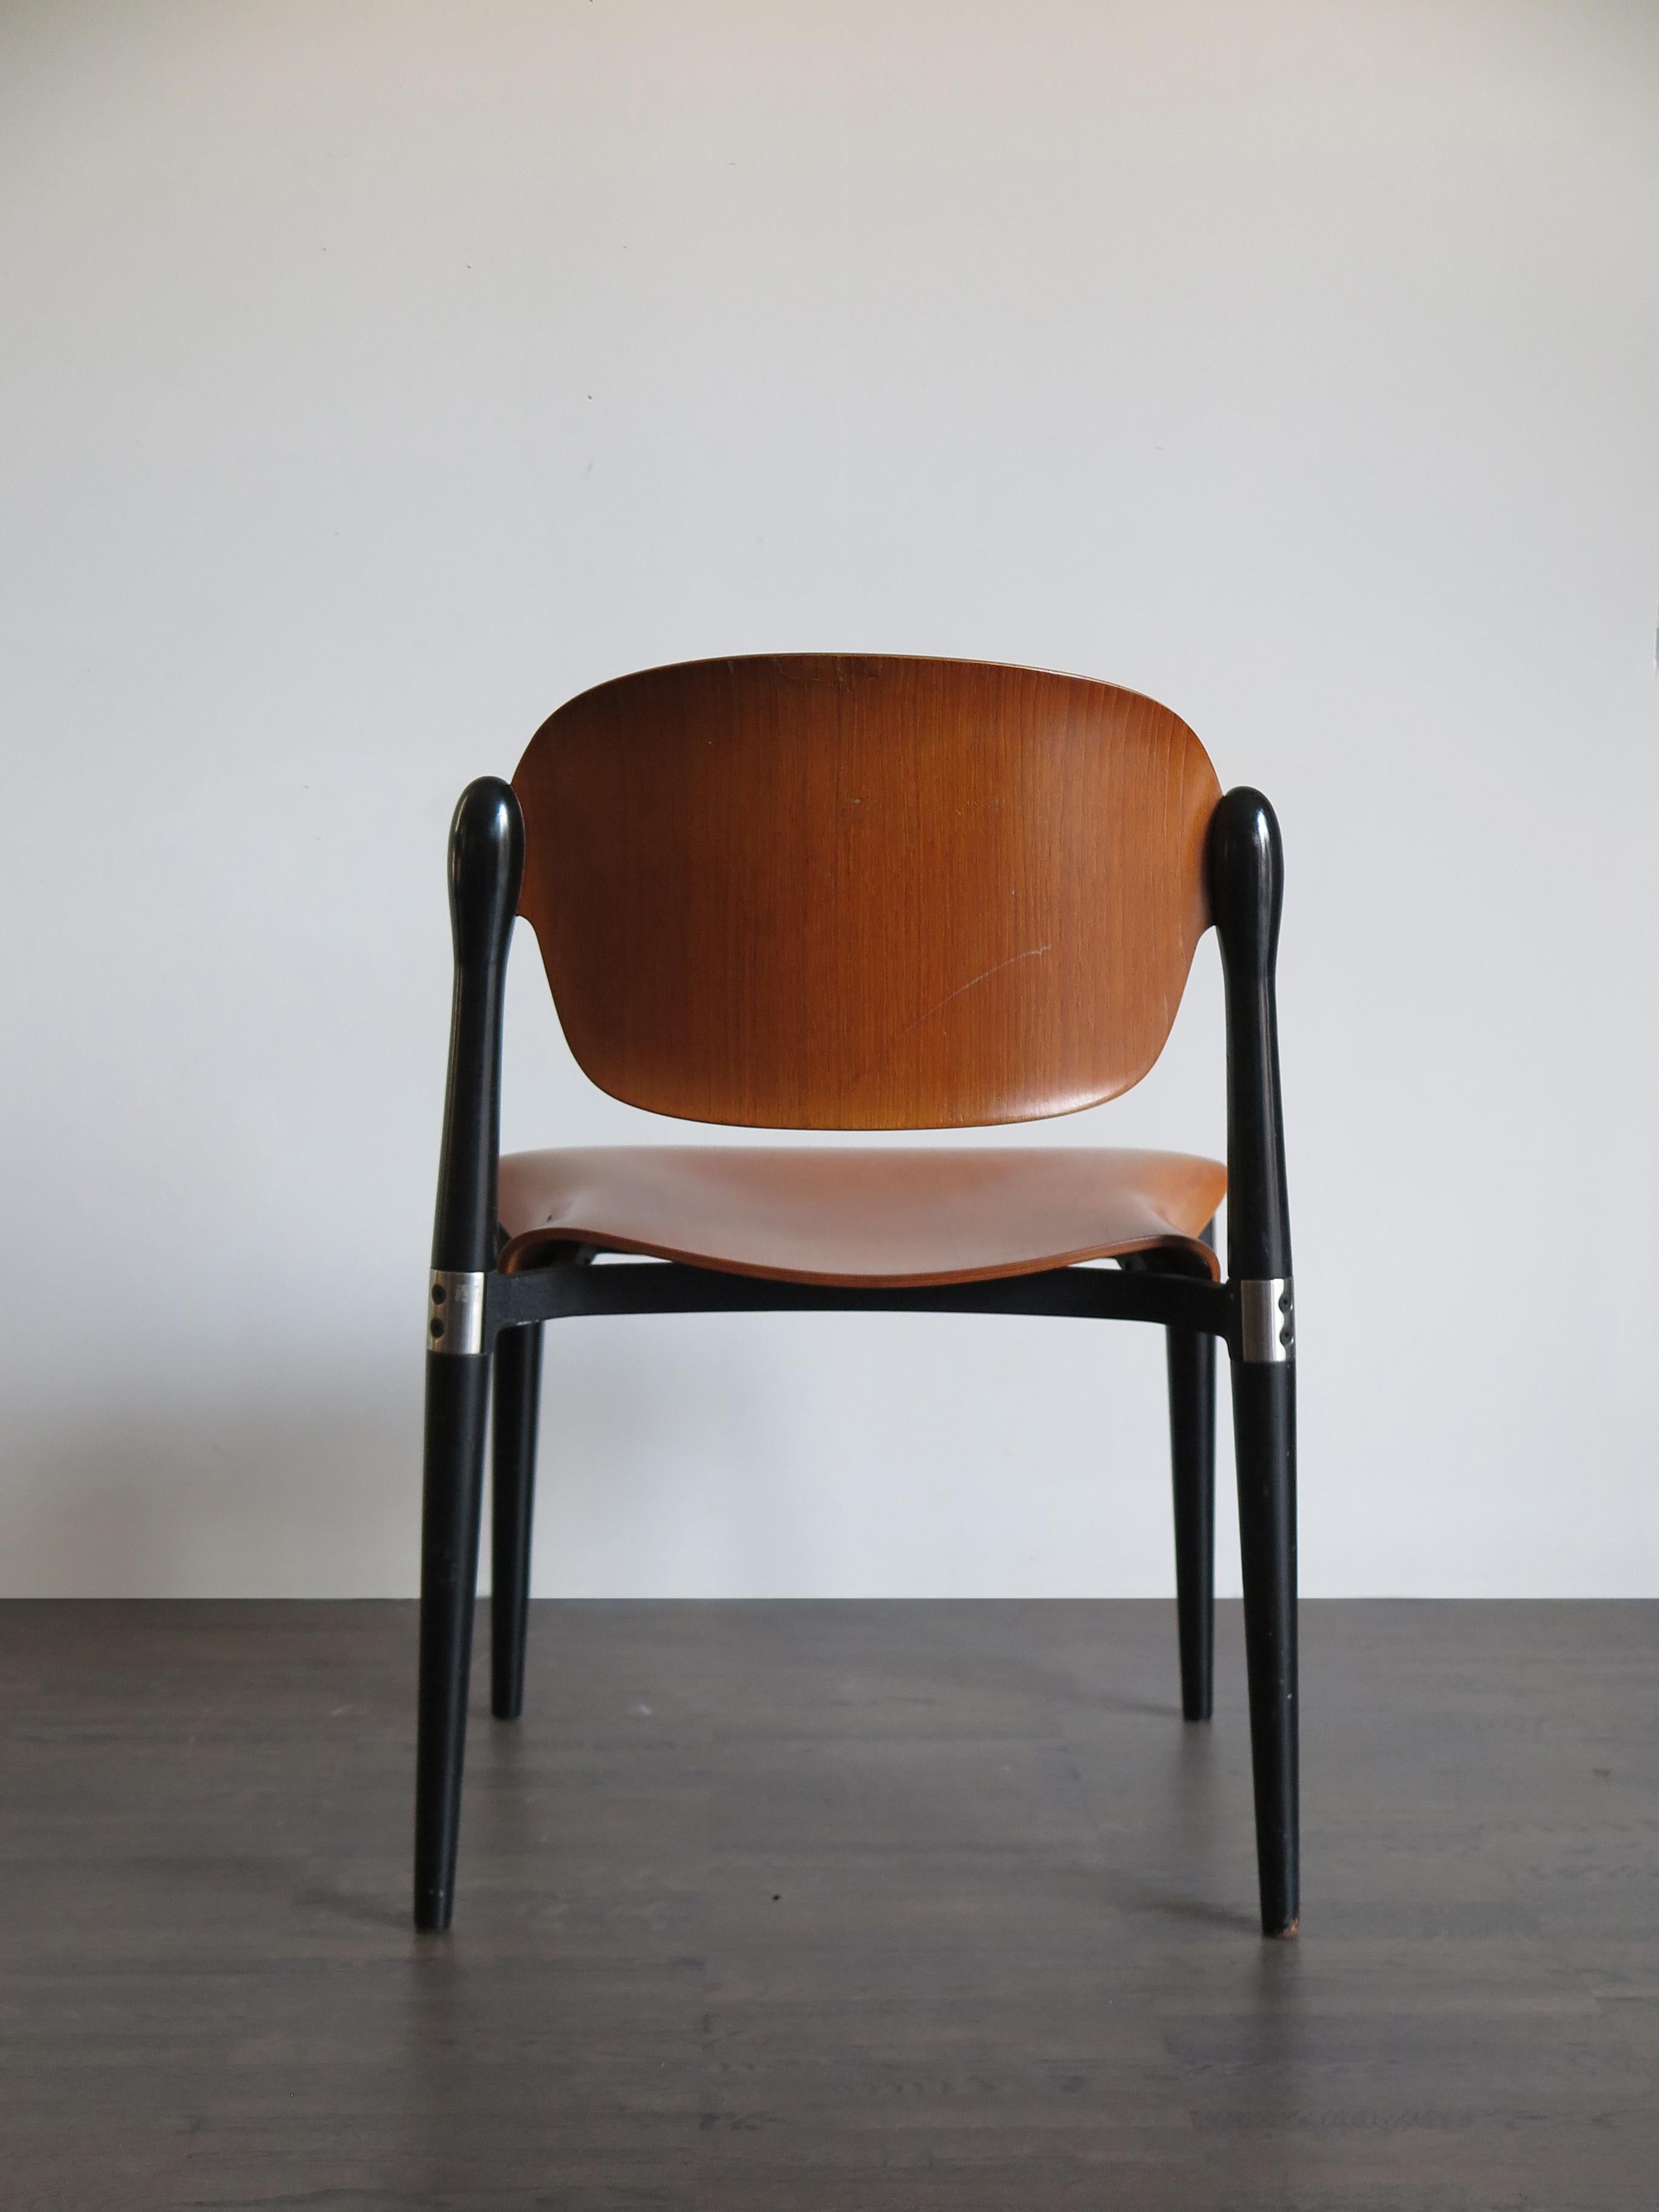 Eugenio Gerli for Tecno Italian Curved Wood Dining Chairs Model “S832”, 1962 3